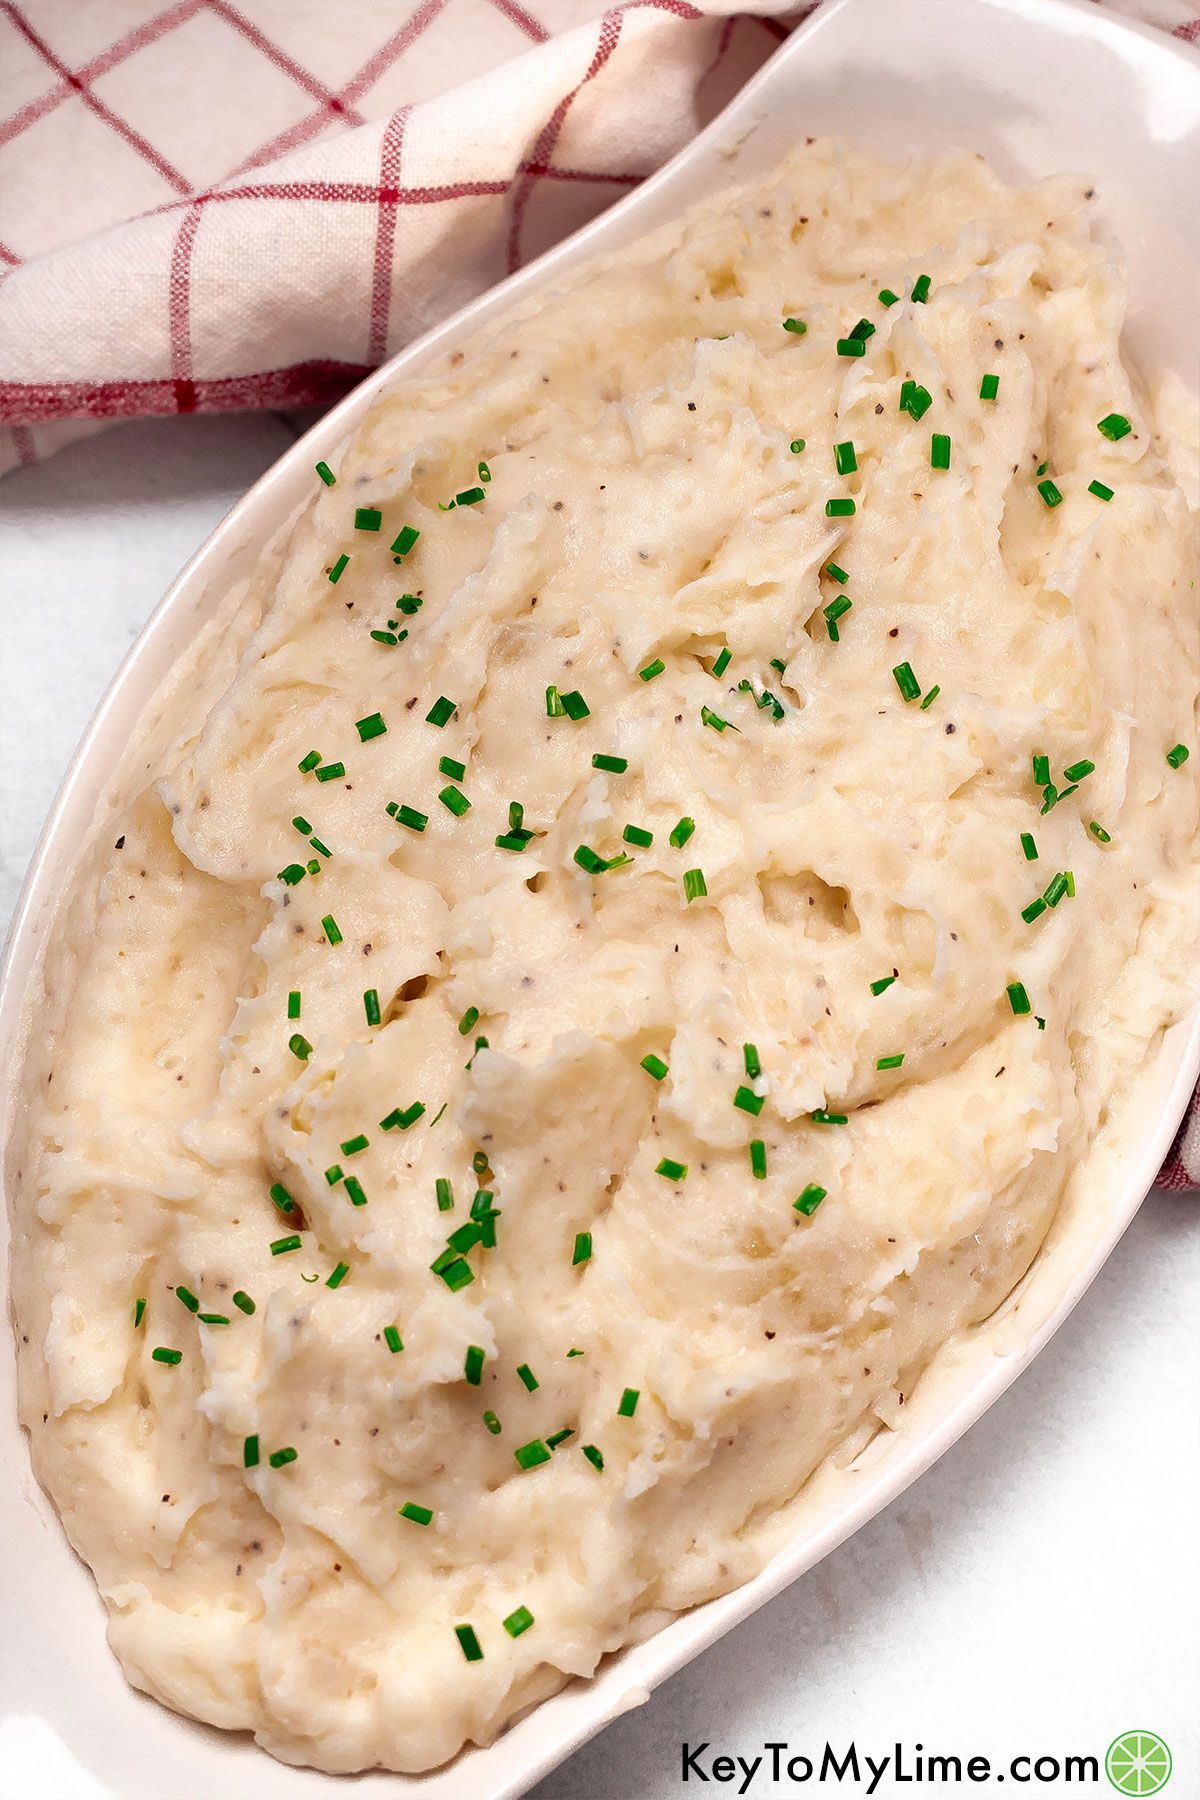 An overhead image of a large serving dish filled with garnished mashed potatoes.